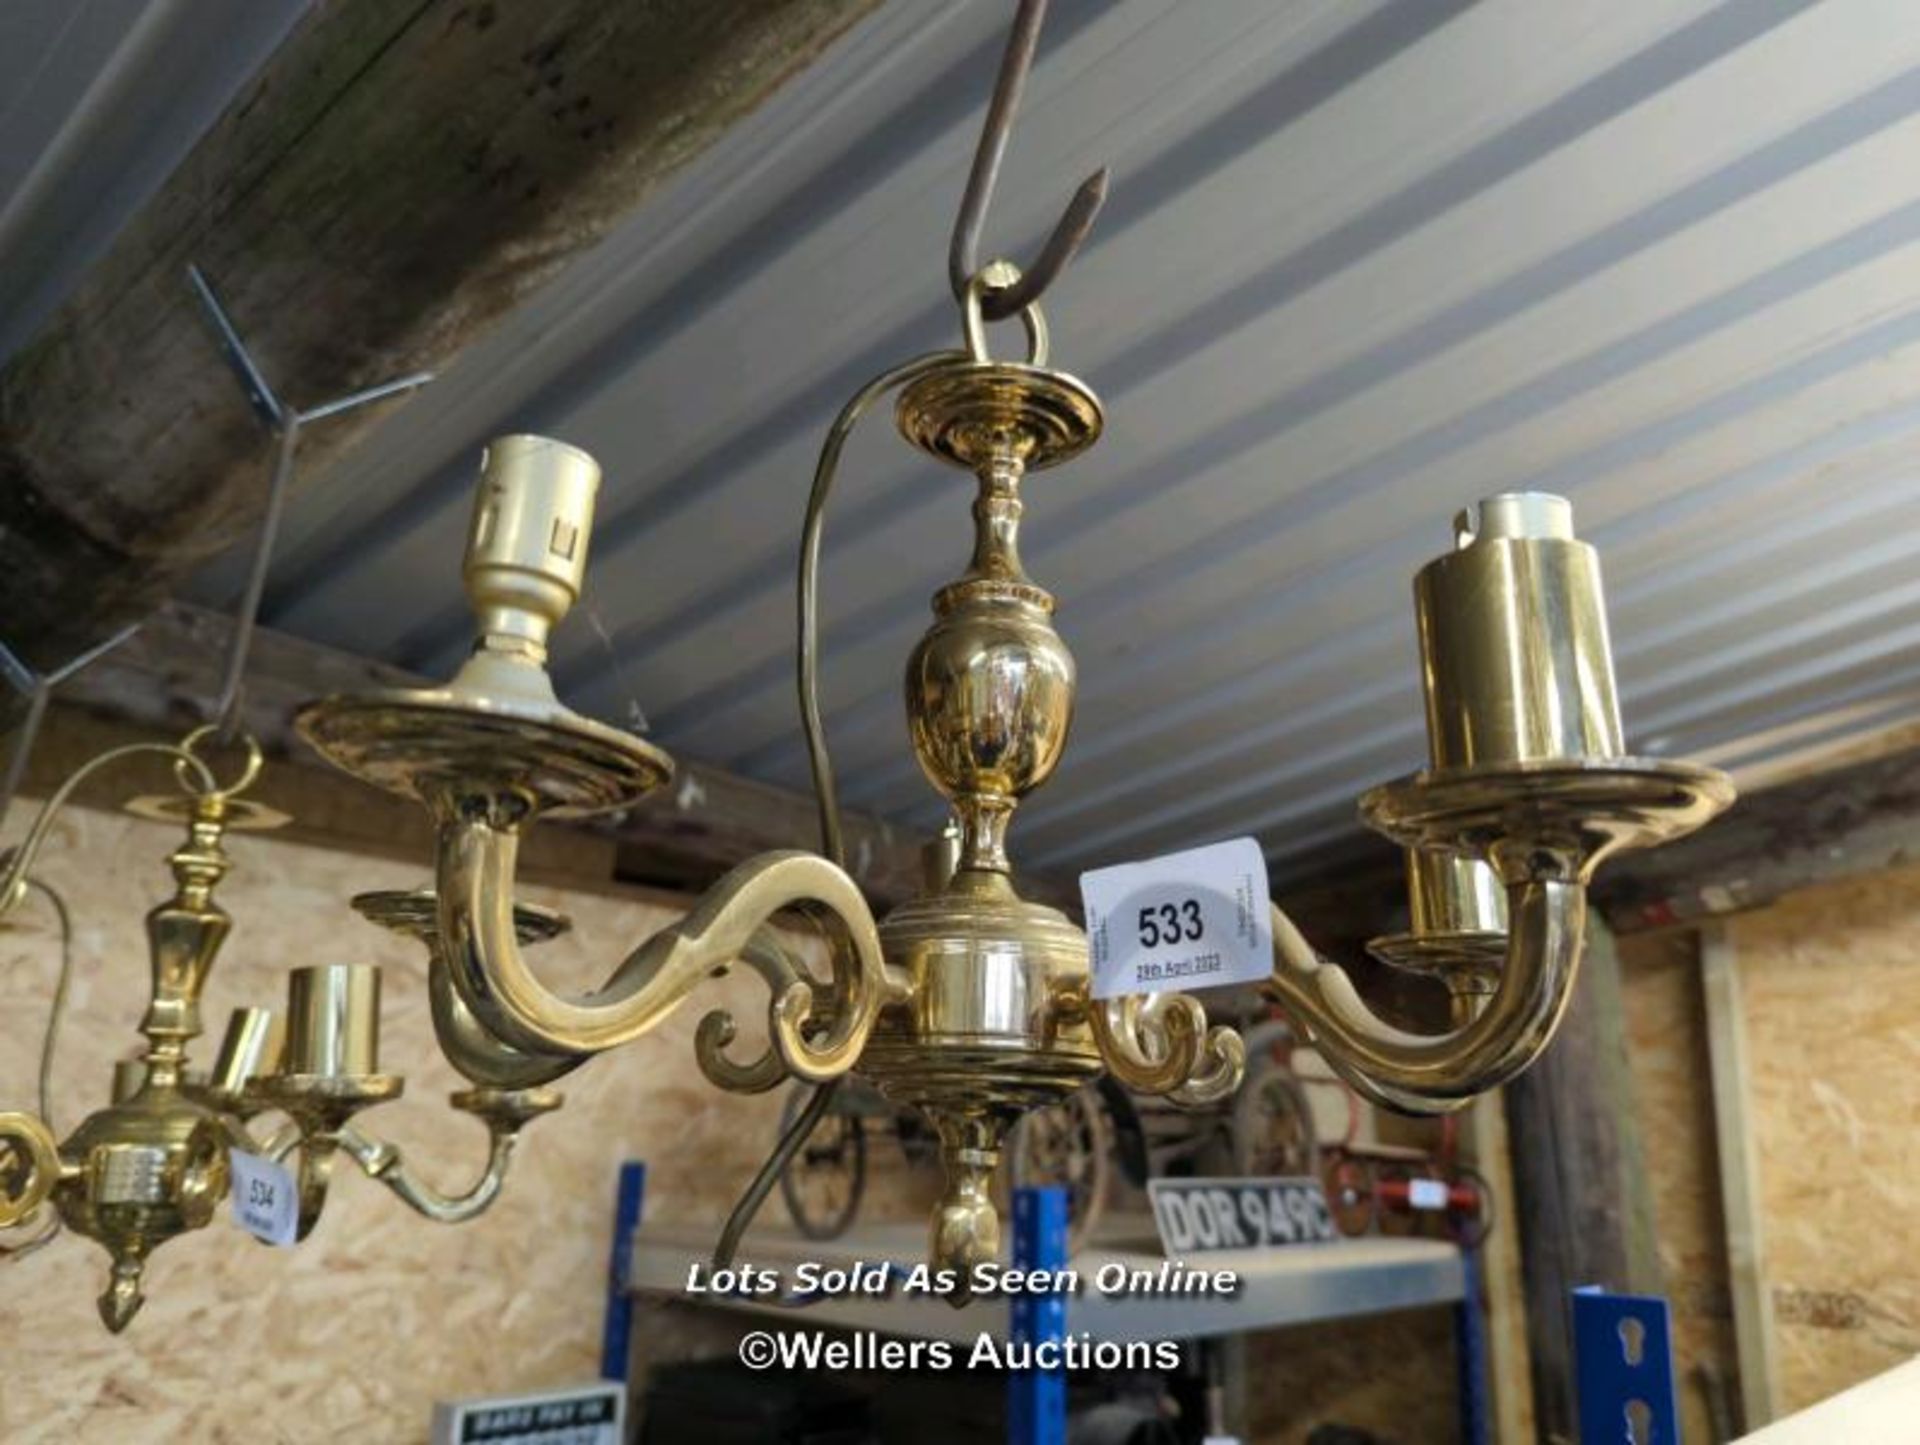 *FIVE BRANCH CANDELABRA CONVERTED TO ELECTRIC, 14 INCHES HIGH / ALL LOTS ARE LOCATED AT AUTHENTIC